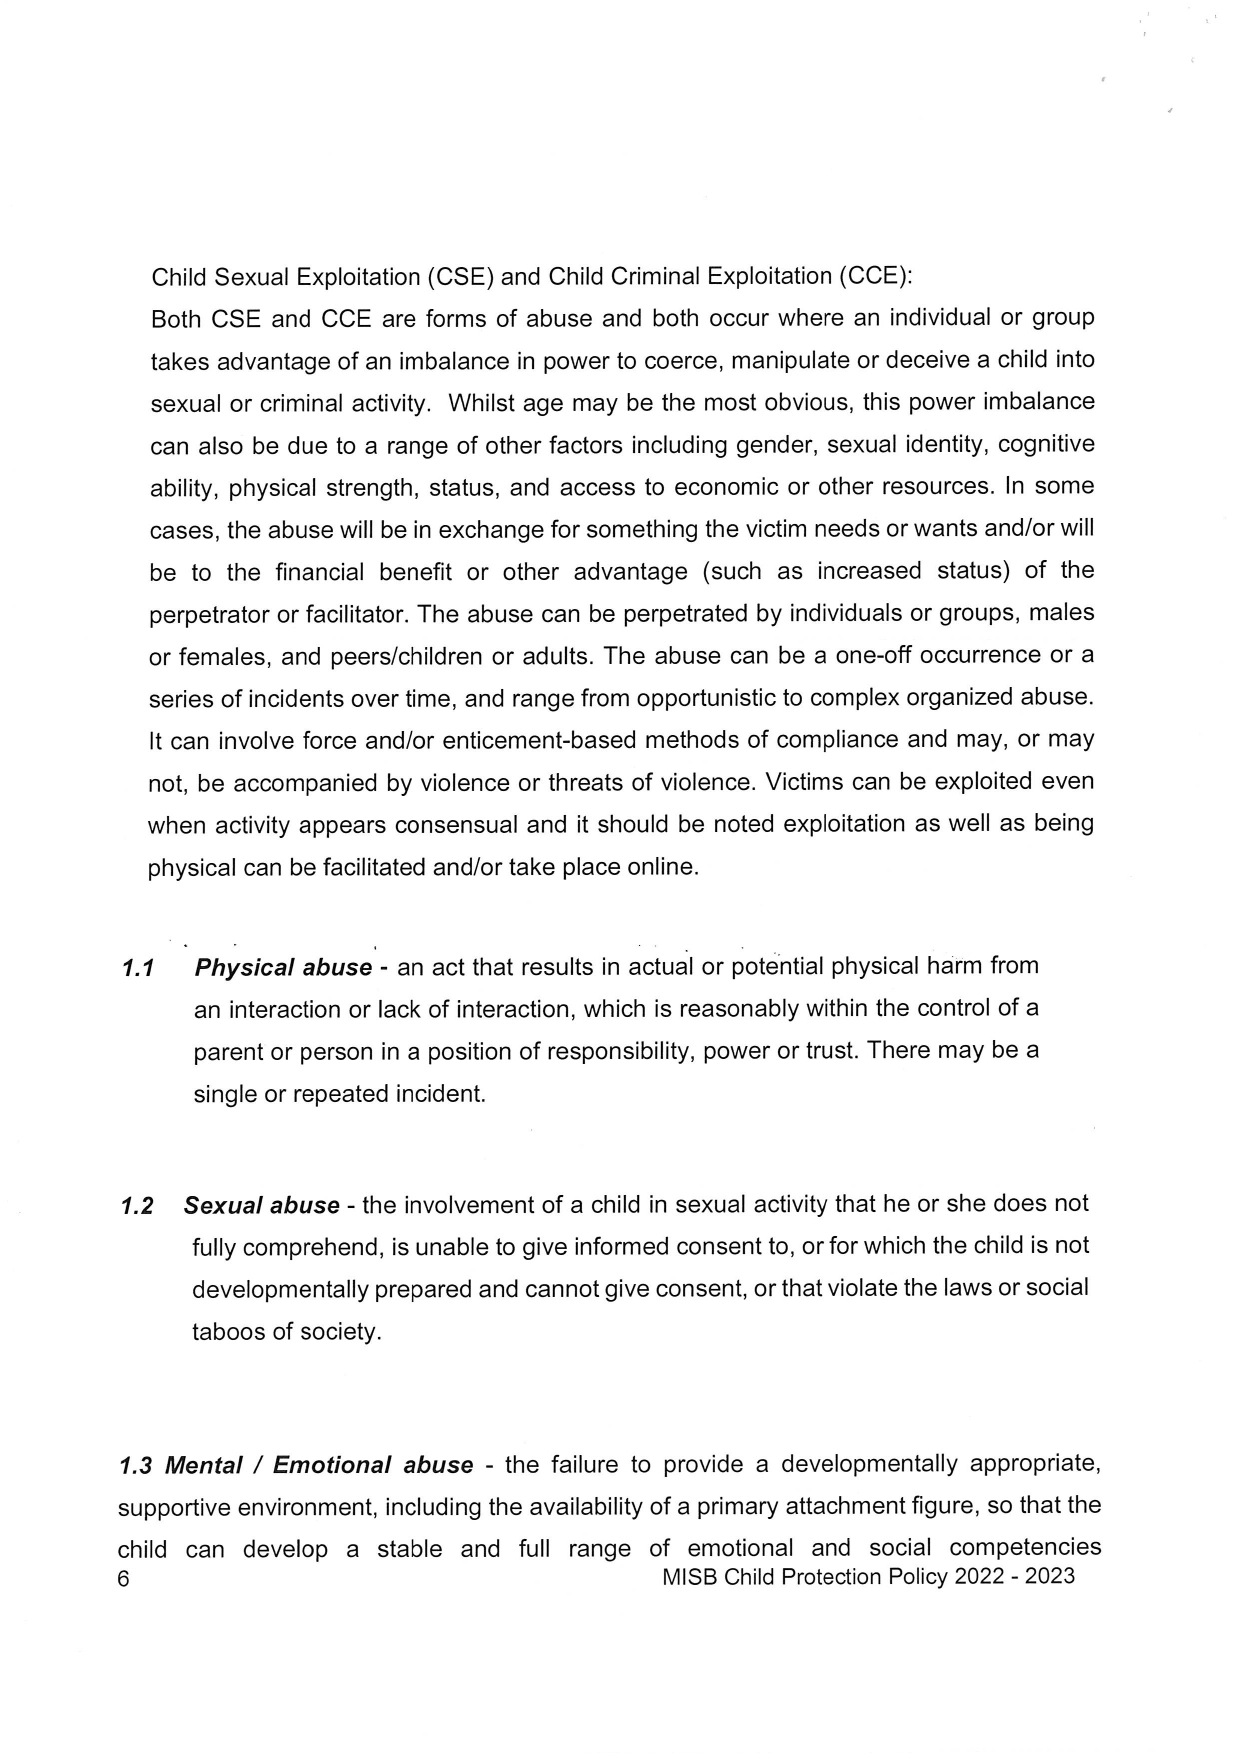 CHILD PROTECTION POLICY page 0006